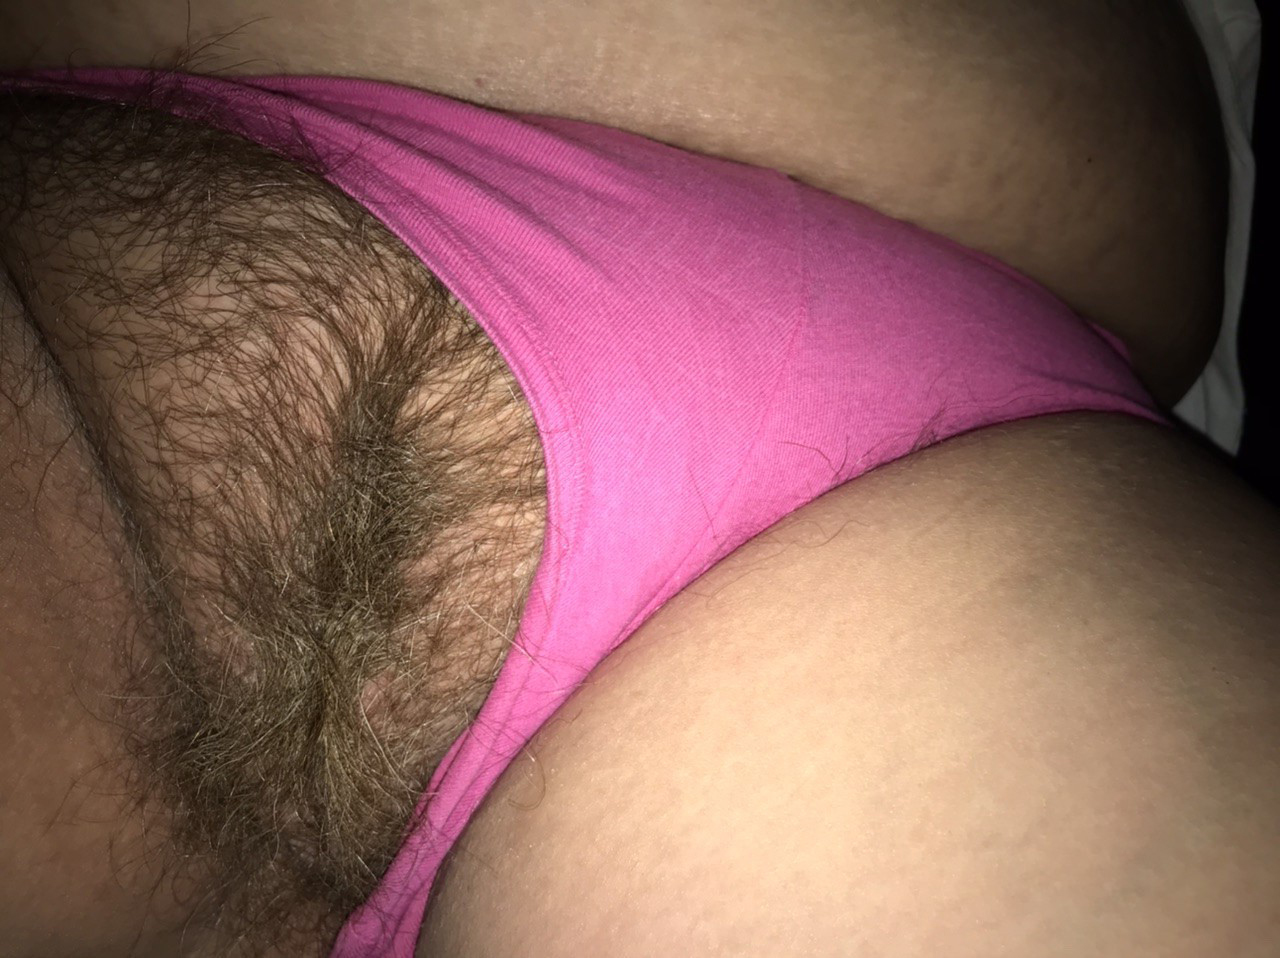 reality hairy pussy close with regard to pics